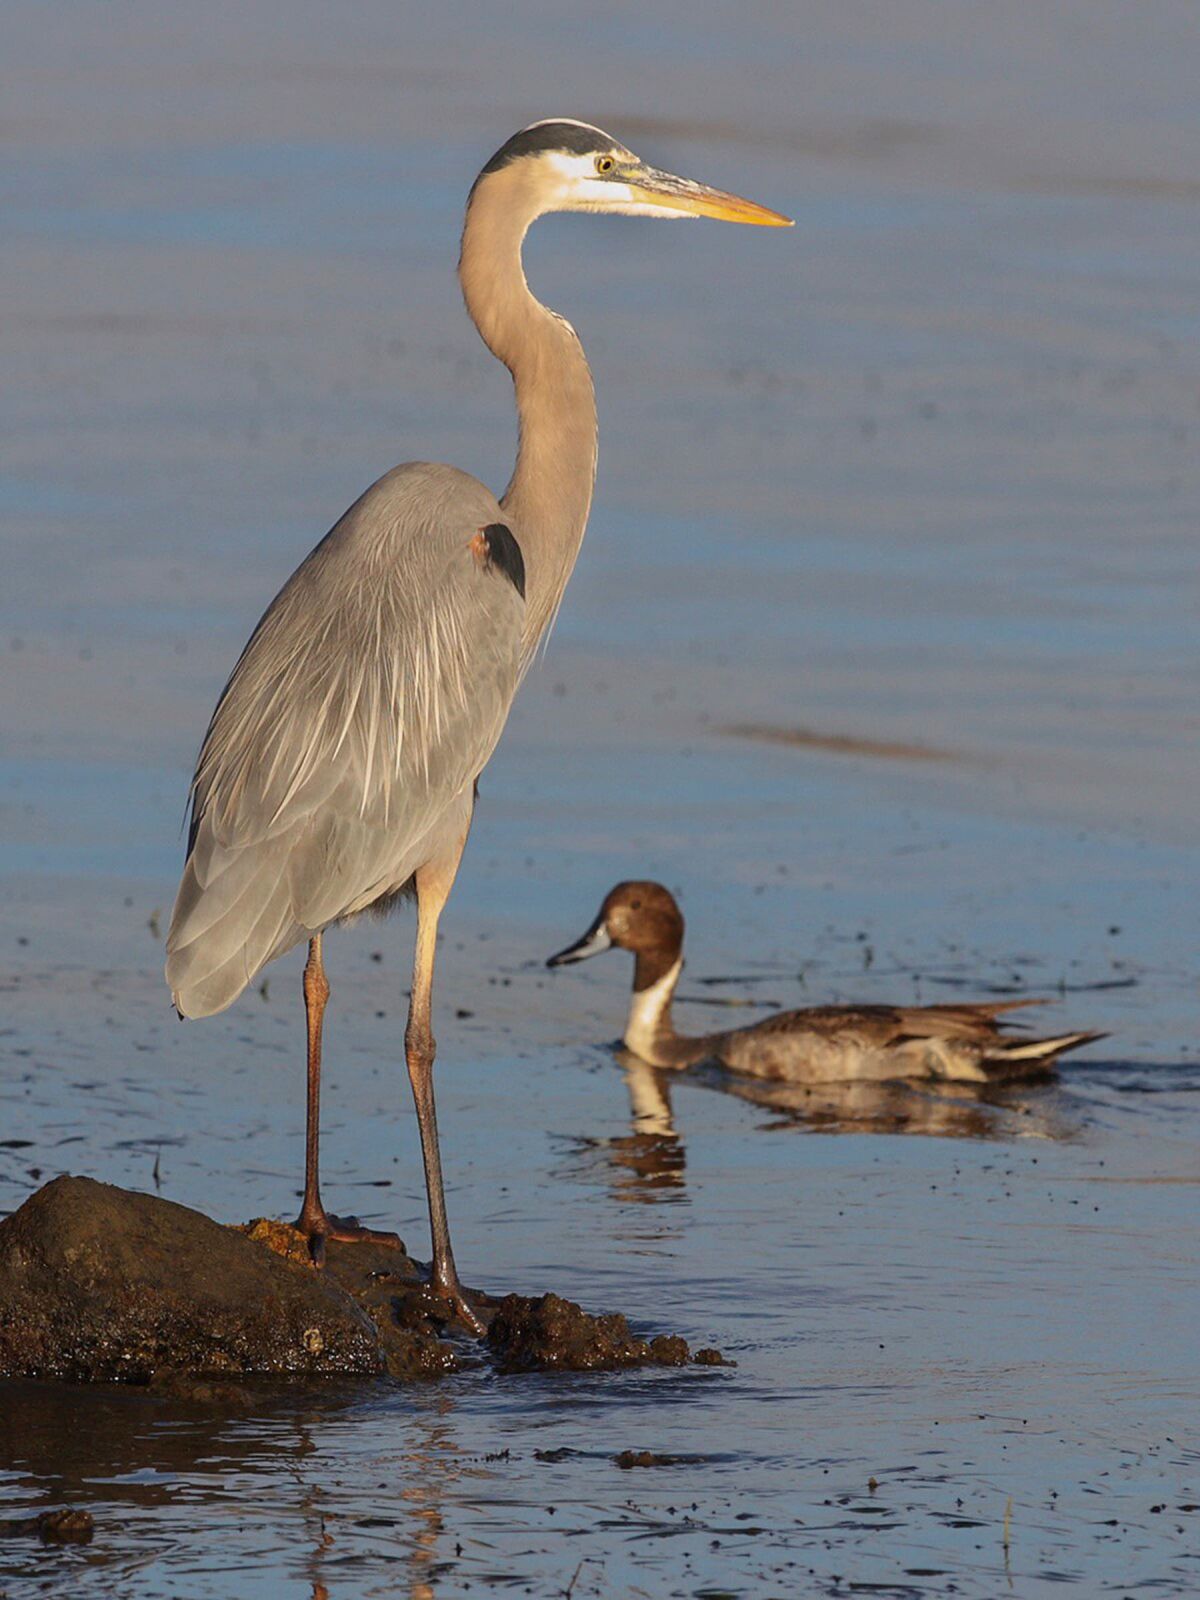 Great blue herons and pintail ducks are both frequent visitors to local wetland areas.